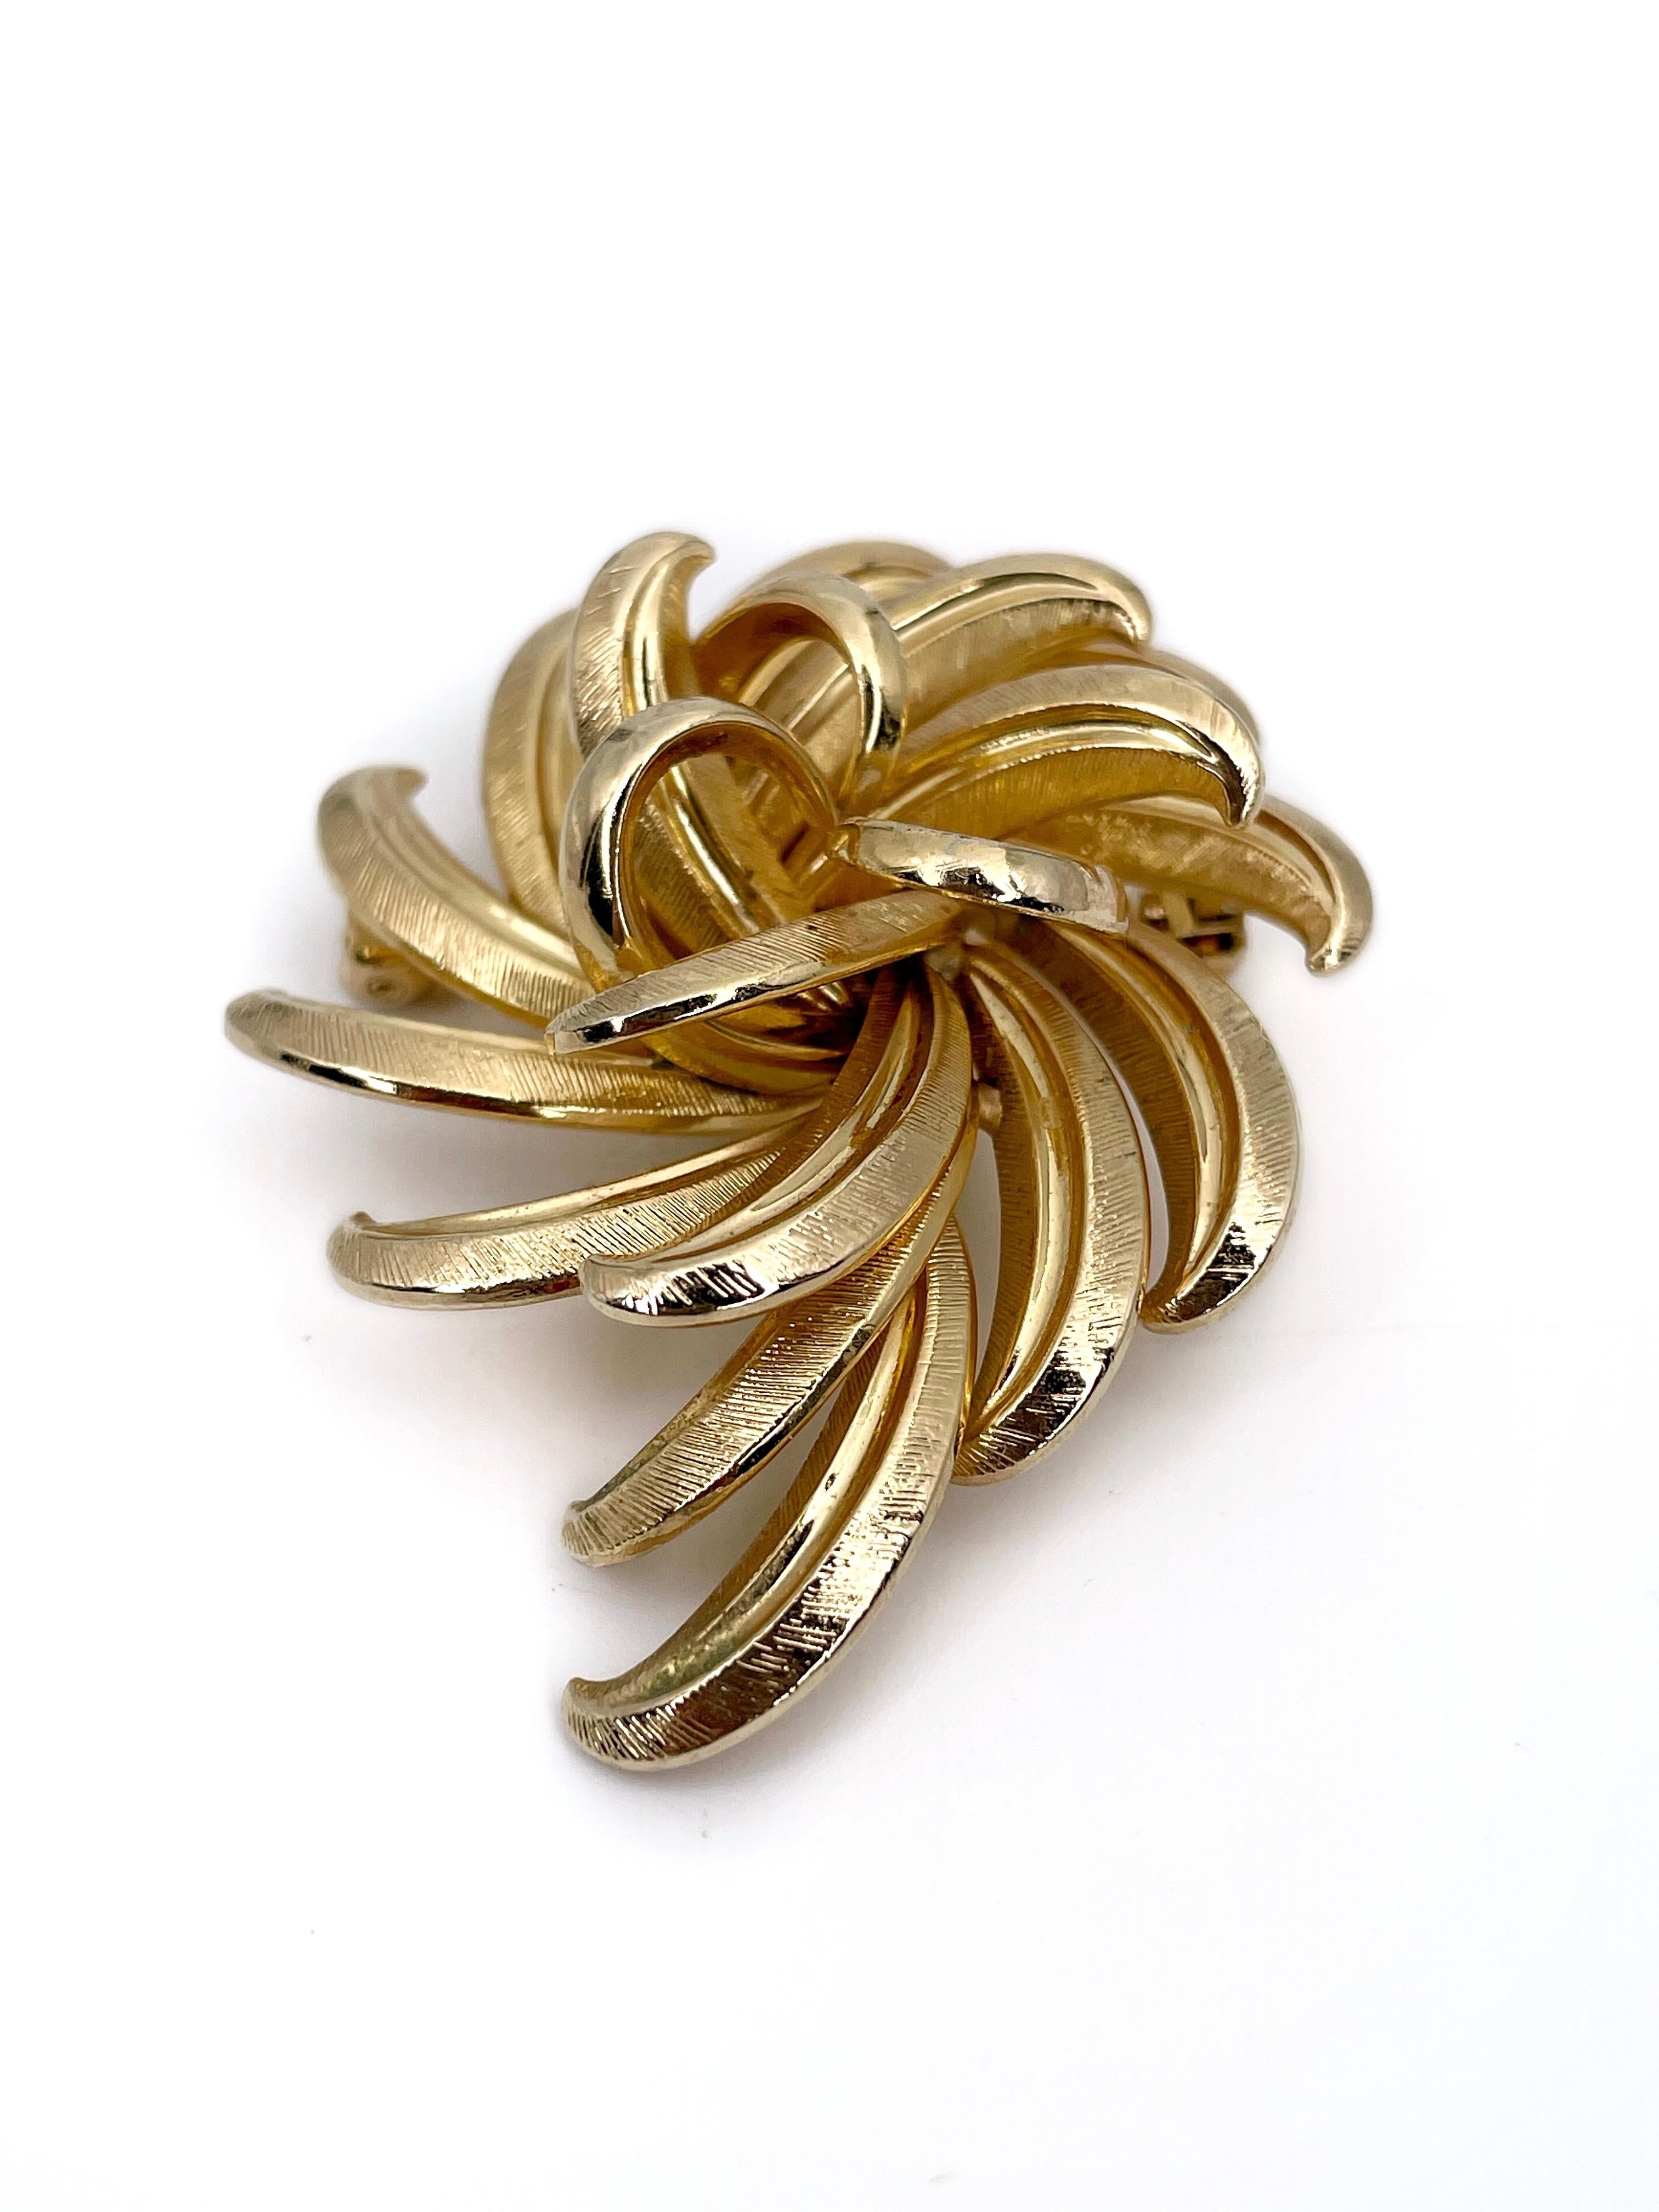 This is an abstract floral design vintage brooch designed by Grosse in 1970. This piece is gold plated. 

Markings: “Grosse© - 1970 - Germany” (shown in photos).

Size: 3.5x5cm